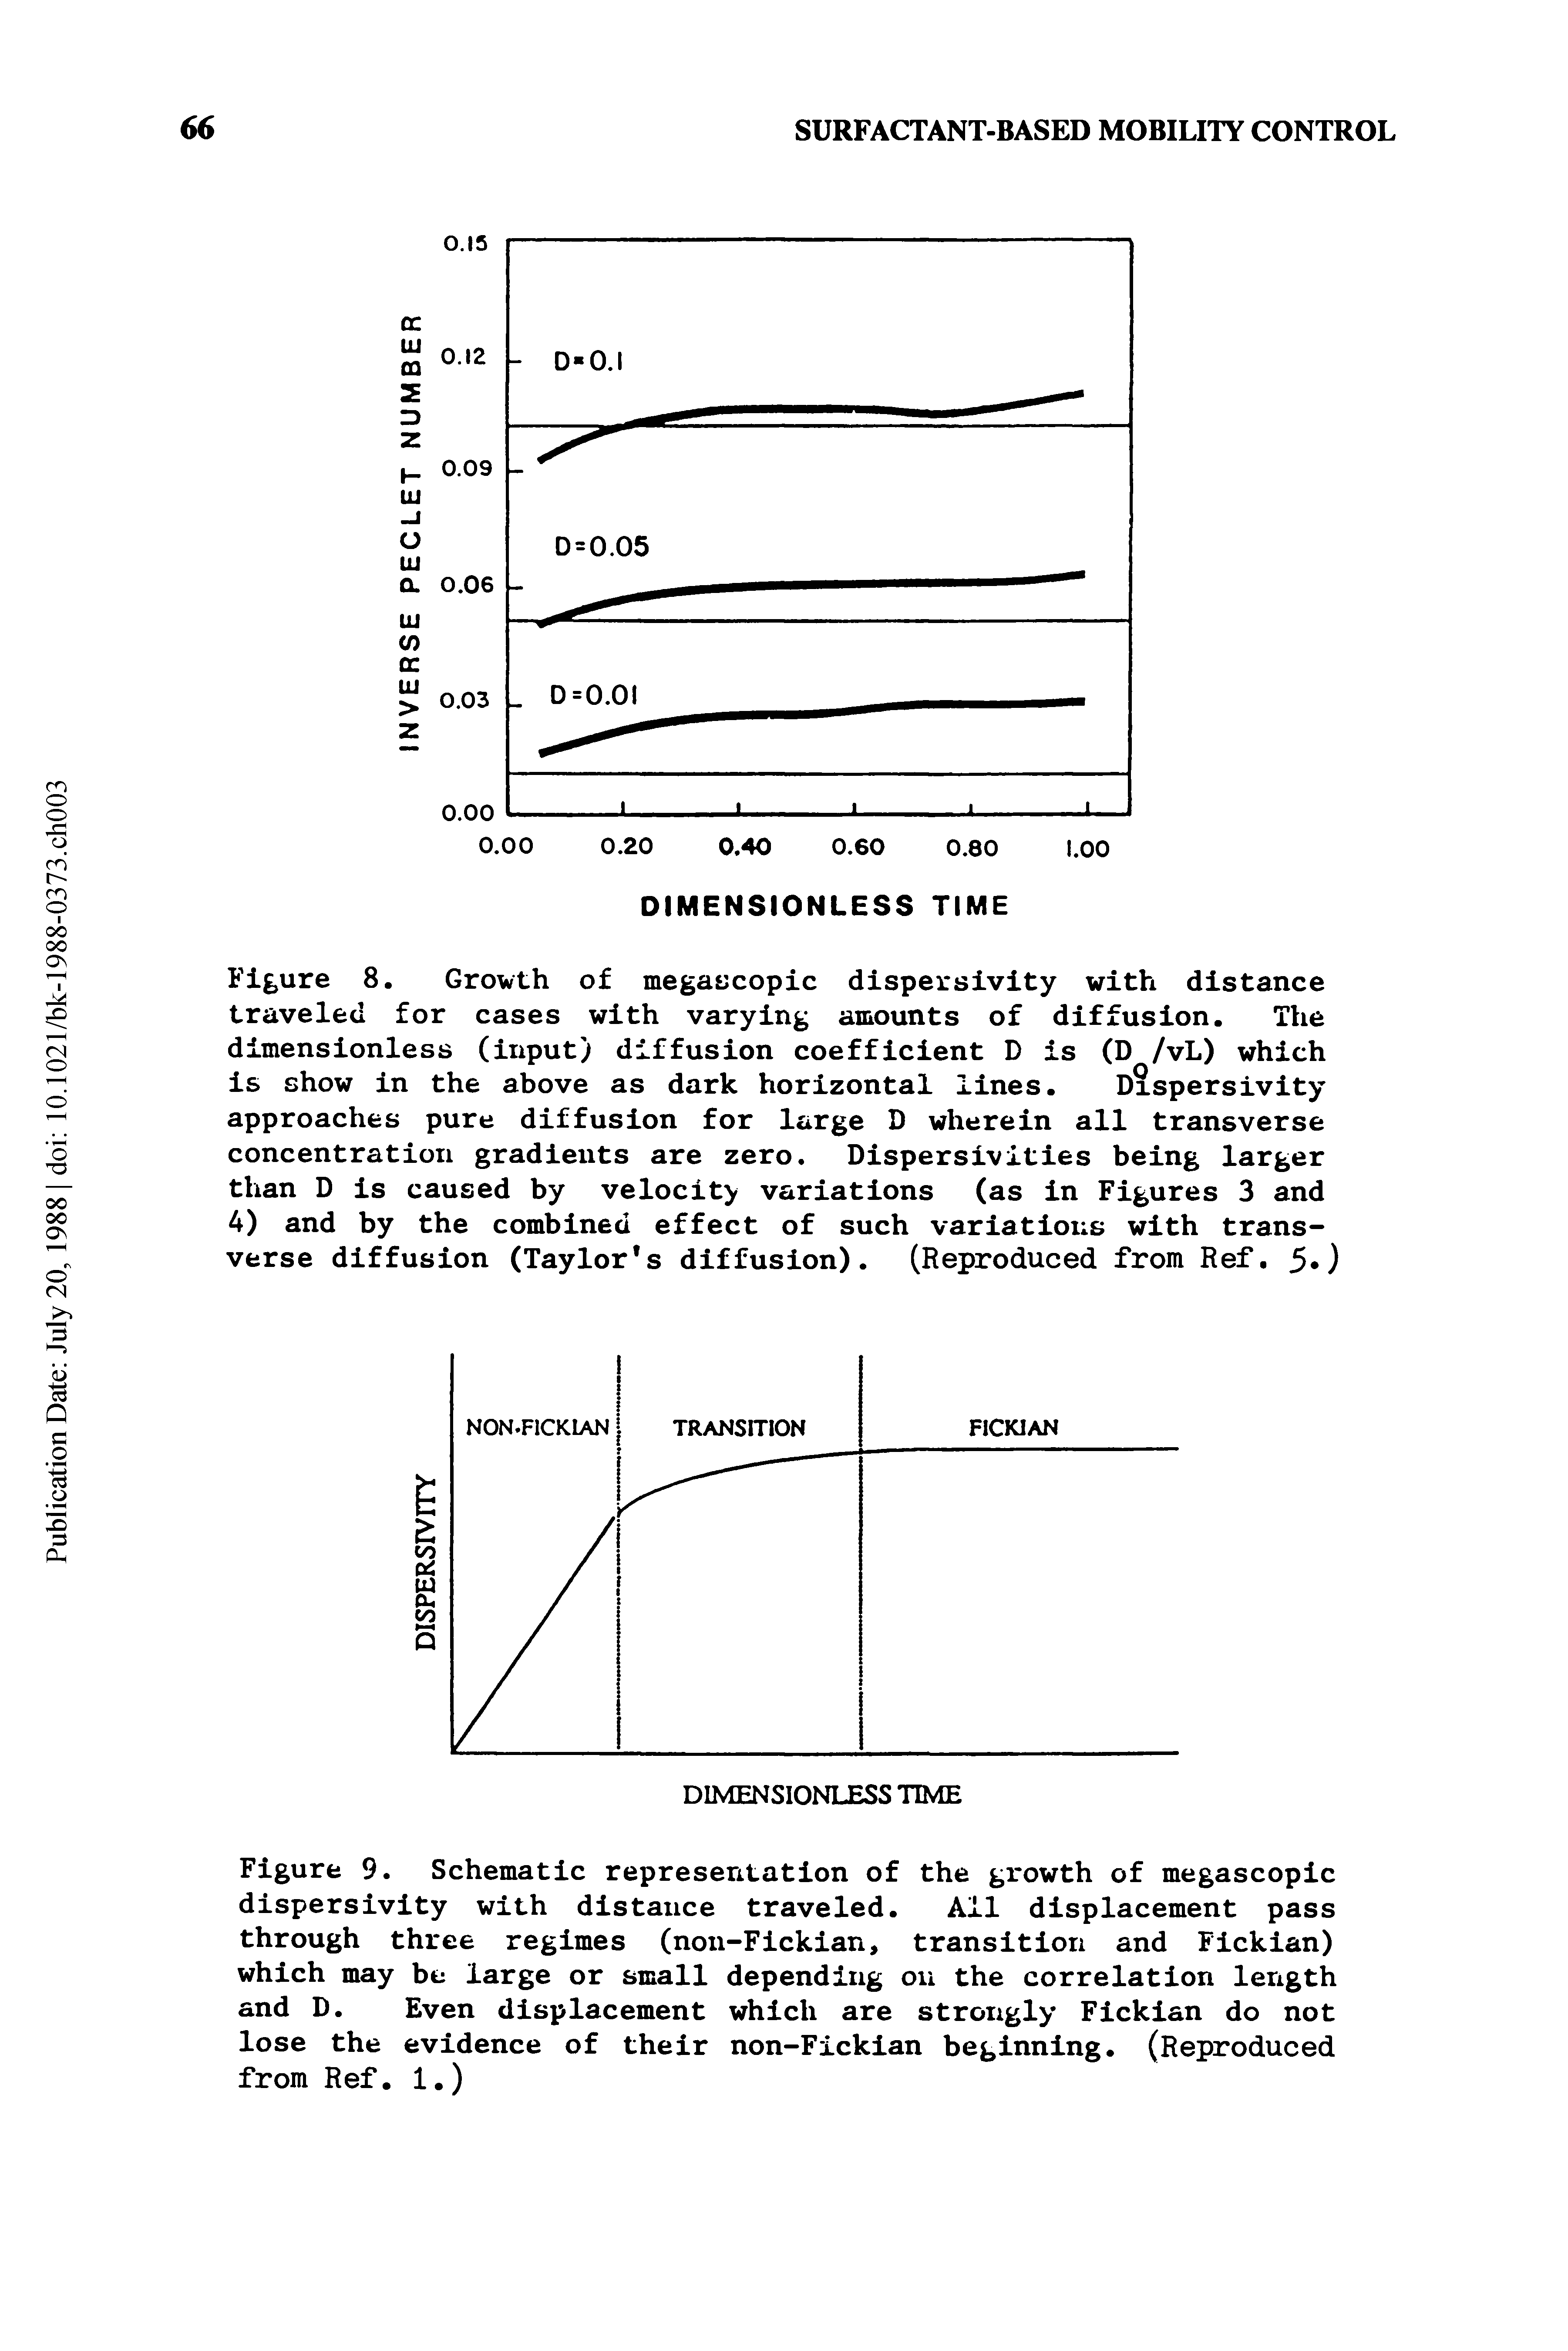 Figure 9. Schematic representation of the growth of megascopic dispersivity with distance traveled. All displacement pass through three regimes (noii-Fickian, transition and Fickian) which may be large or small depending oii the correlation length and D. Even displacement which are strongly Fickian do not lose the evidence of their non-Fickian beginning. (Reproduced from Ref. 1.)...